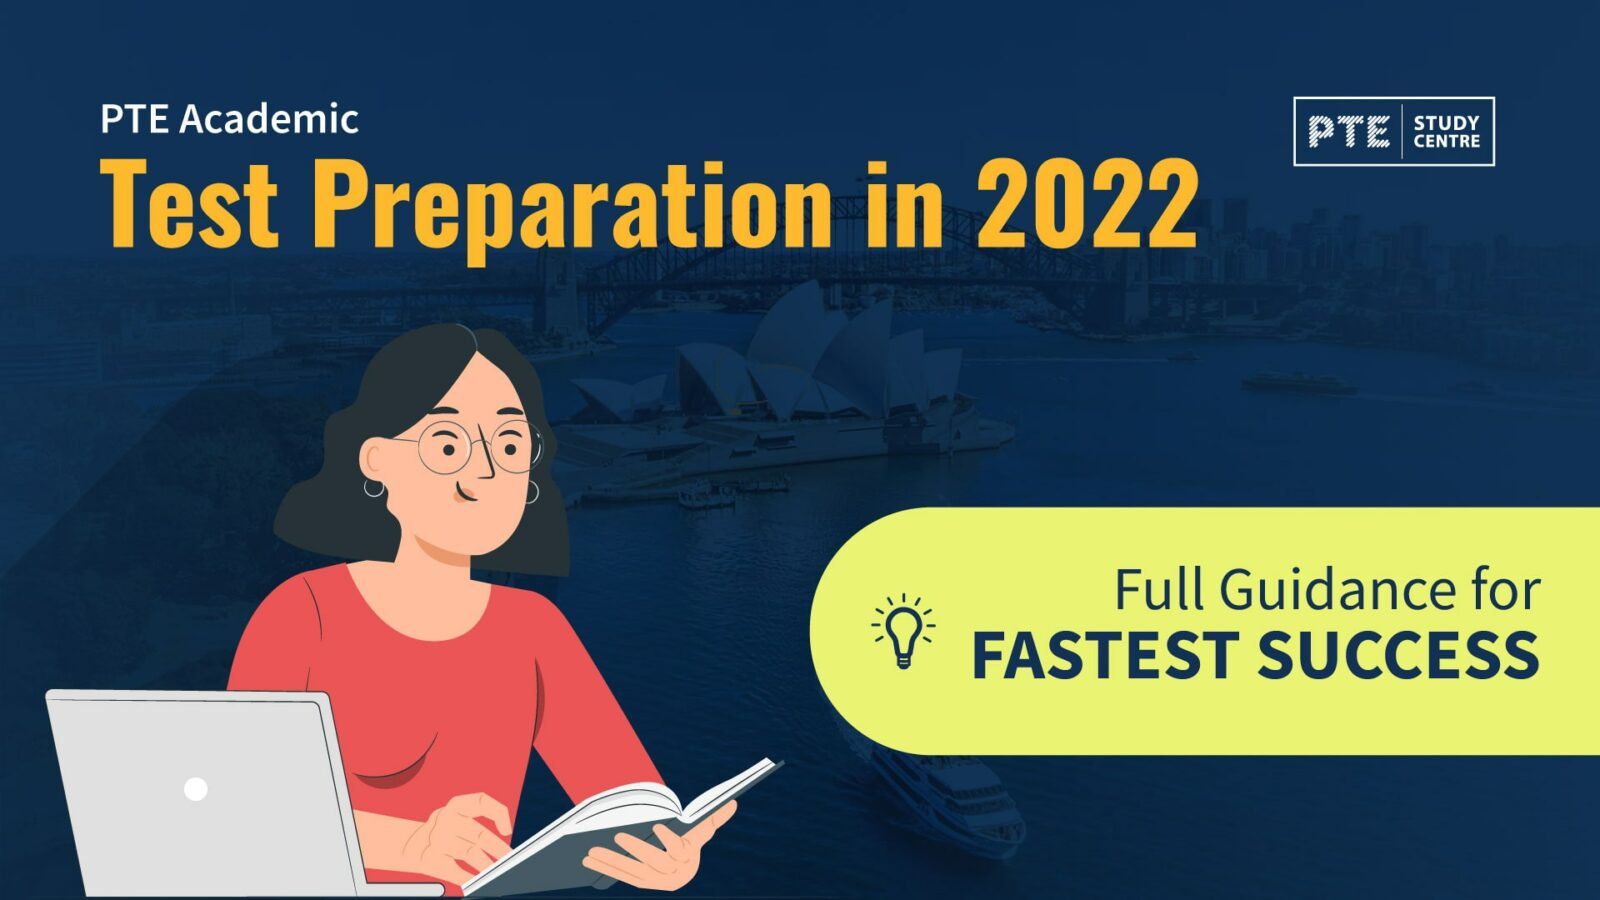 PTE Academic Test Preparation in 2022 image